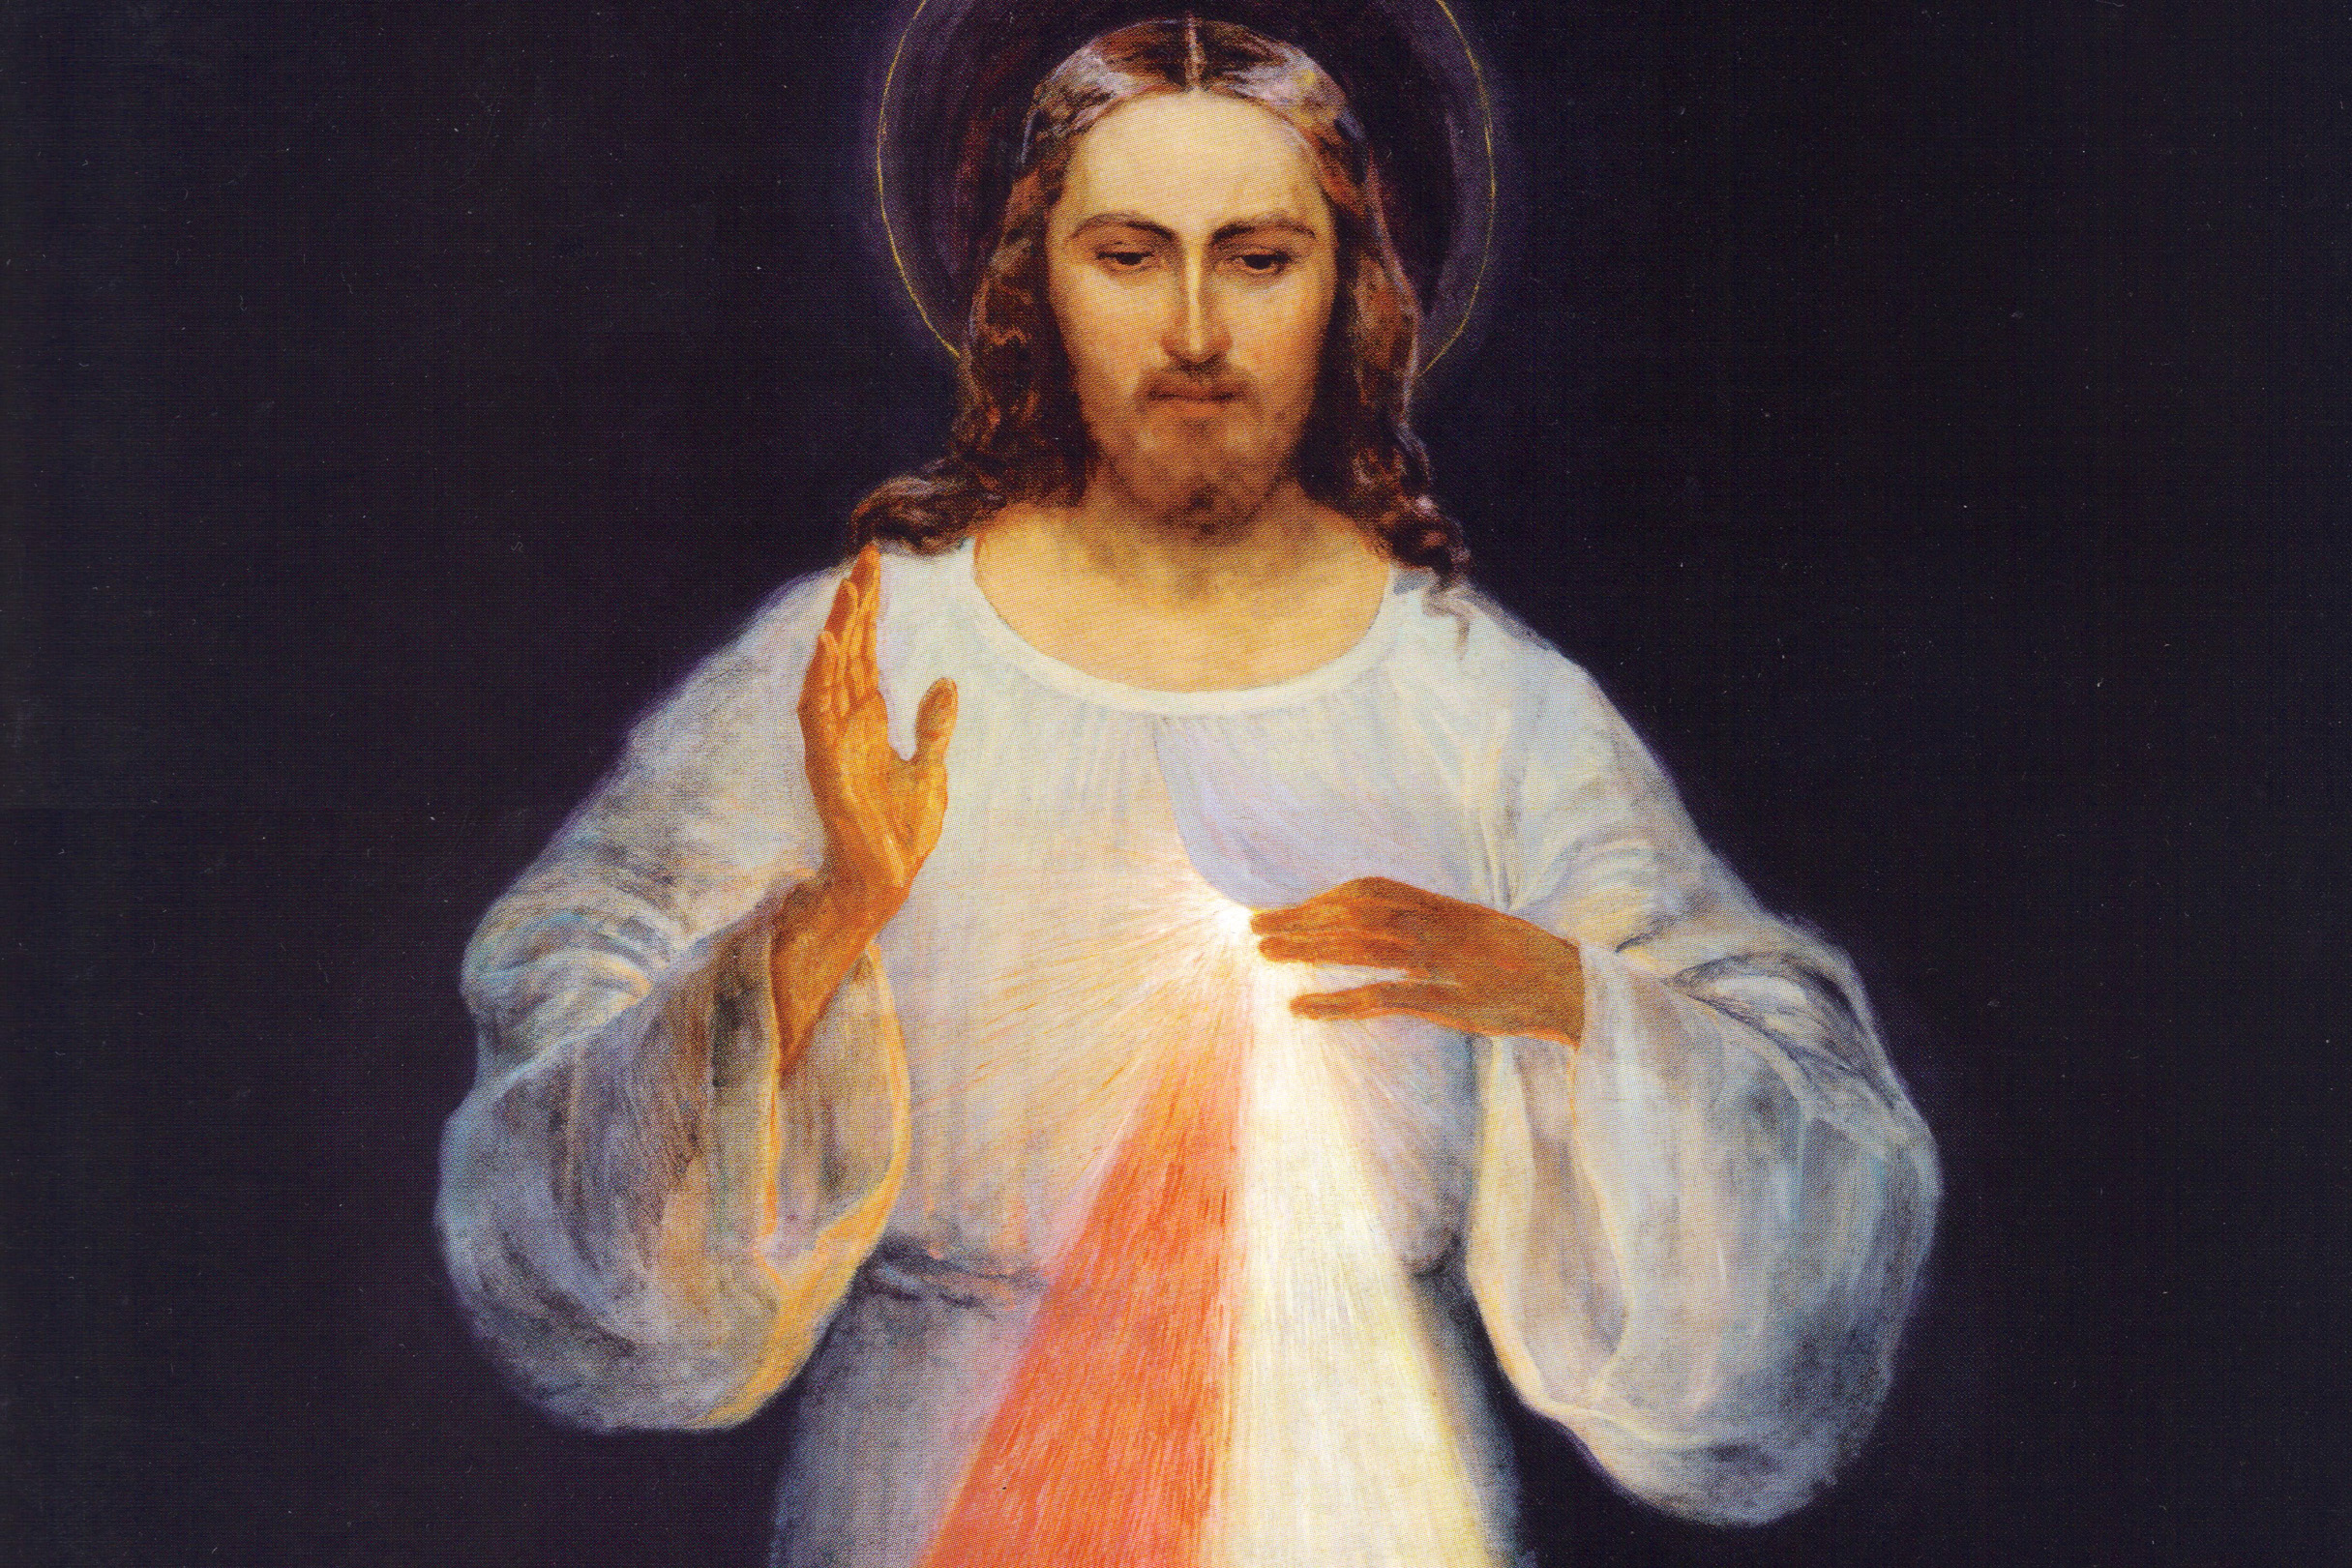 The Painting of Divine Mercy, originally created by Eugeniusz Kazimirowski in 1934 under the direct guidance of St. Maria Faustina Kowalska, whose visions were the foundation for the Chaplet of Divine Mercy prayers.